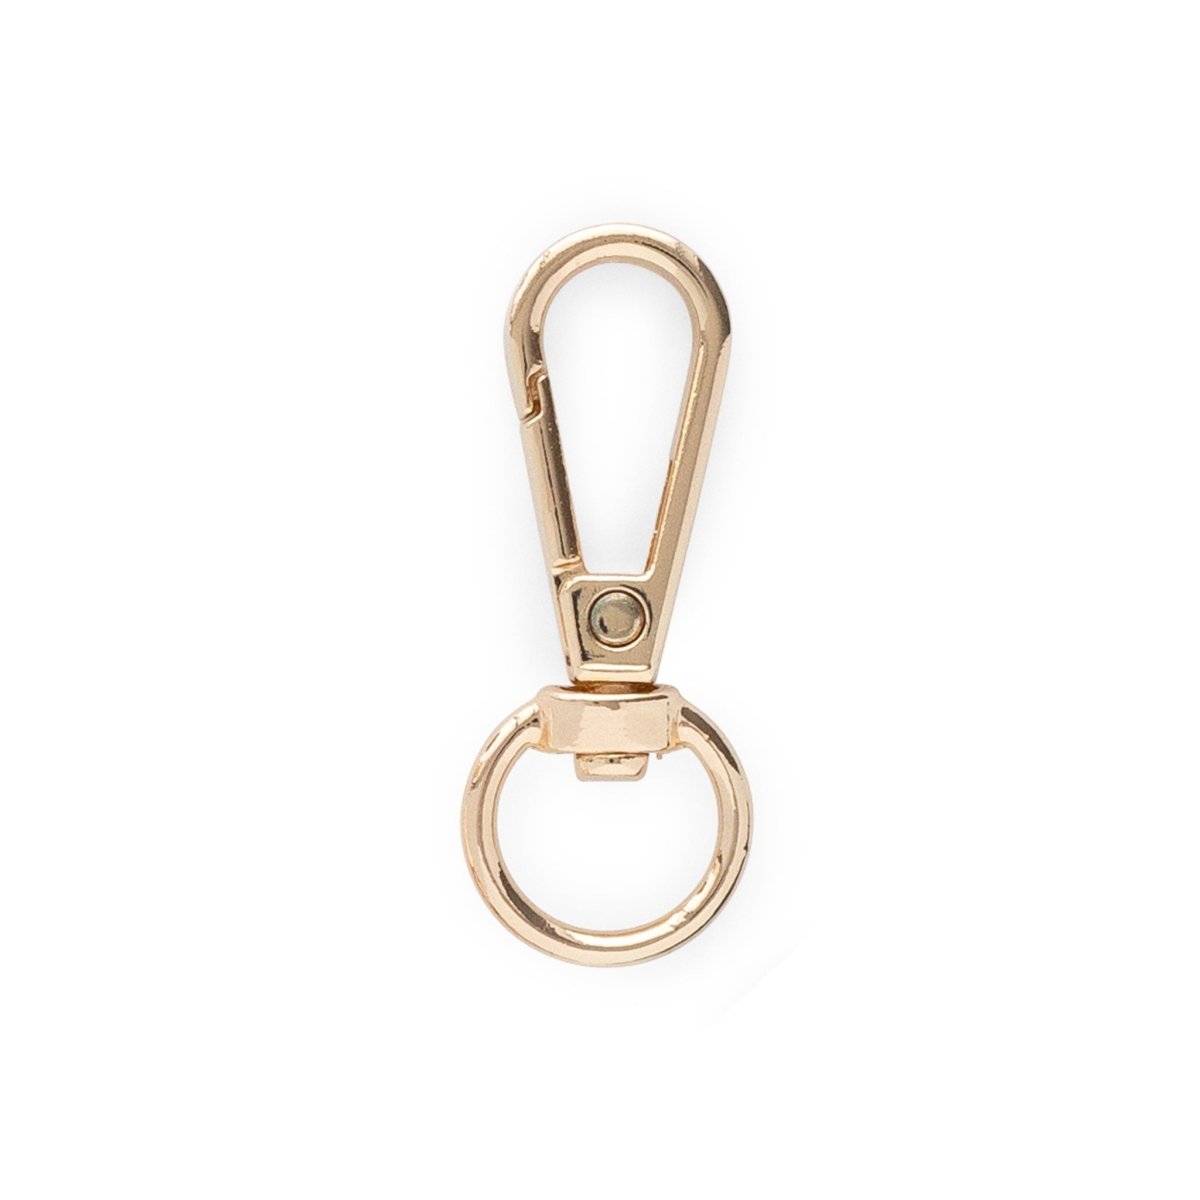 Lanyards Premium J Hook Clips Soft Gold from Cara & Co Craft Supply